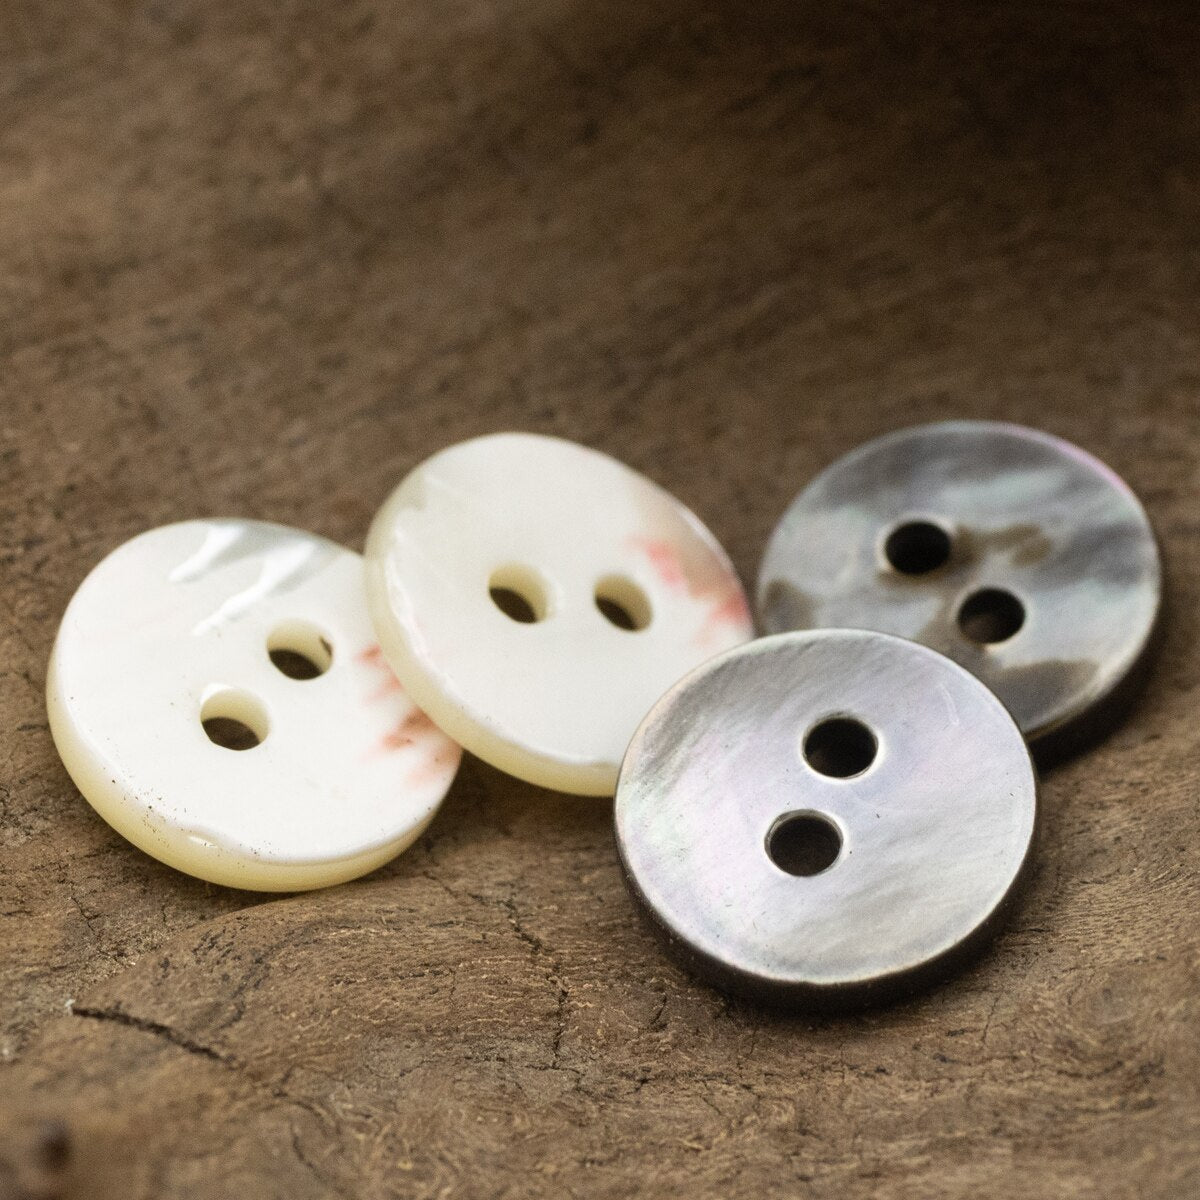 5pcs Two Hole Cute Shill Buttons Black White Black Lip Shell Natural Sewing Accessories